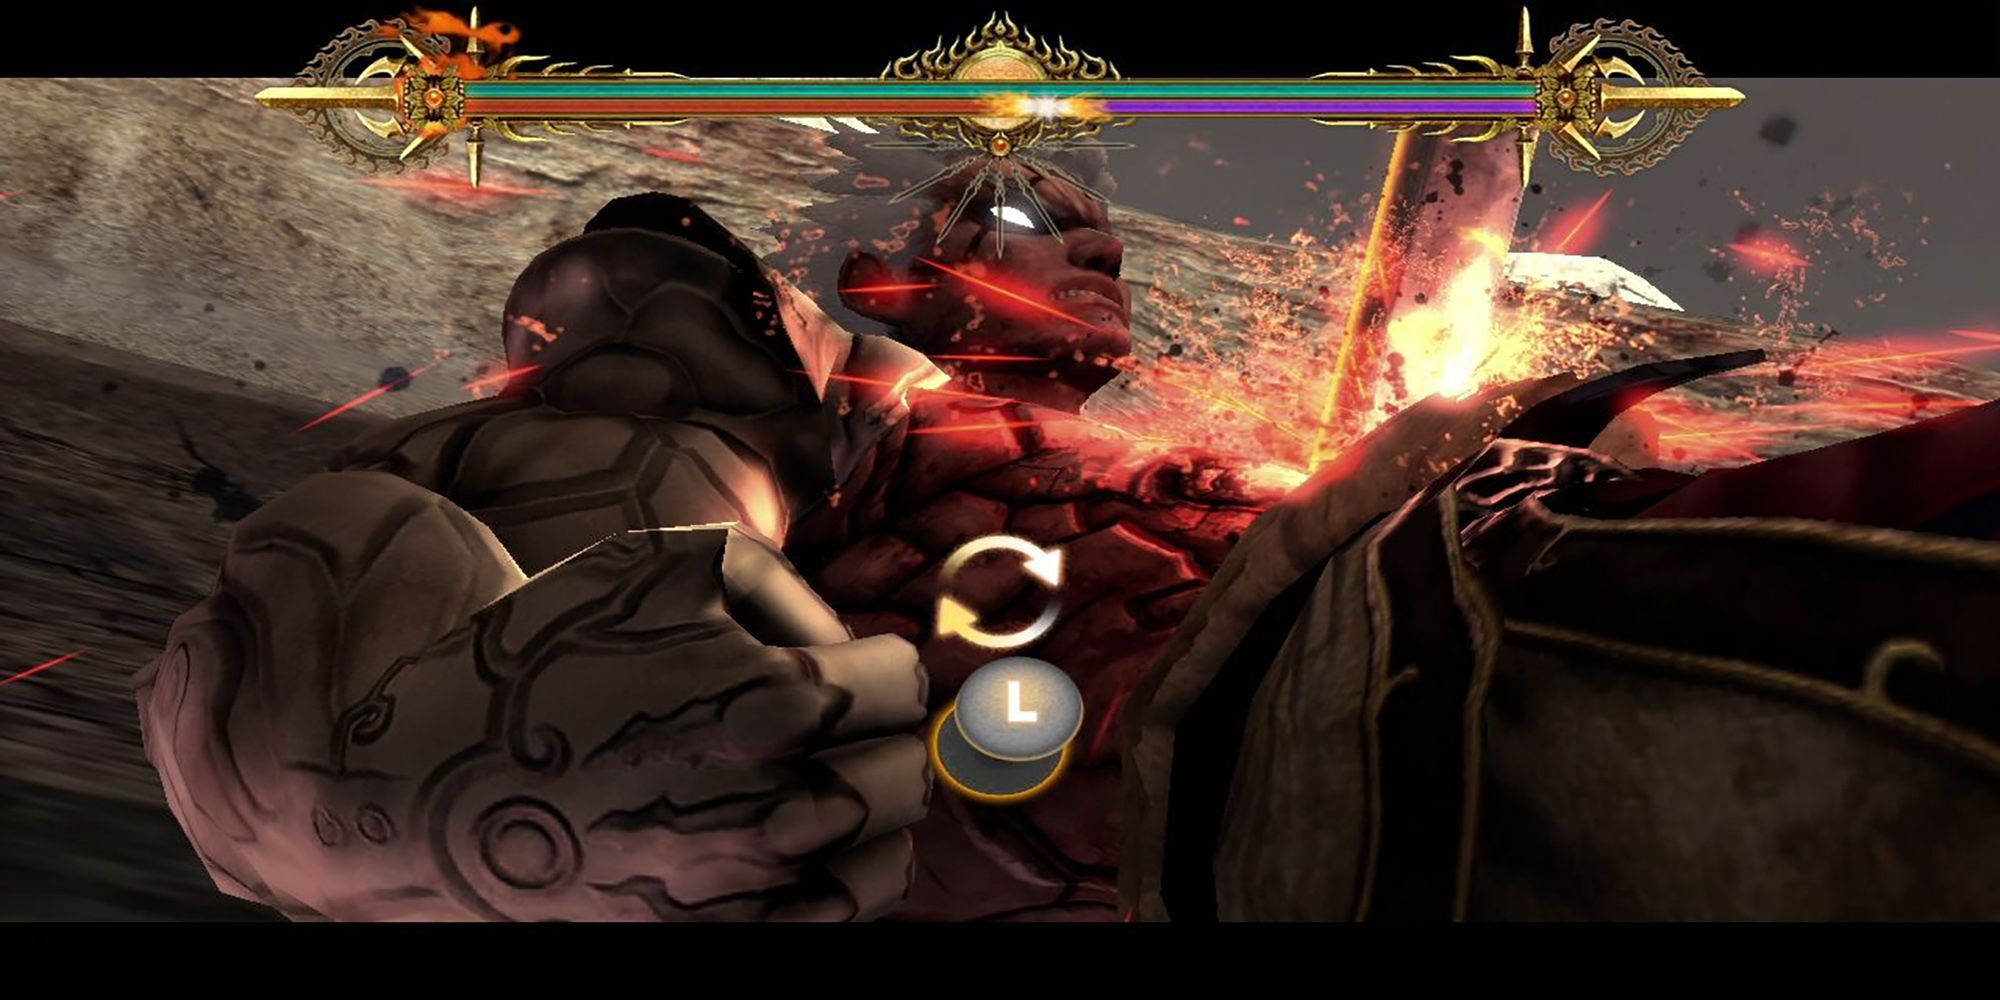 The player must rotate the left thumbstick clockwise in this QTE battle from Asura's Wrath.